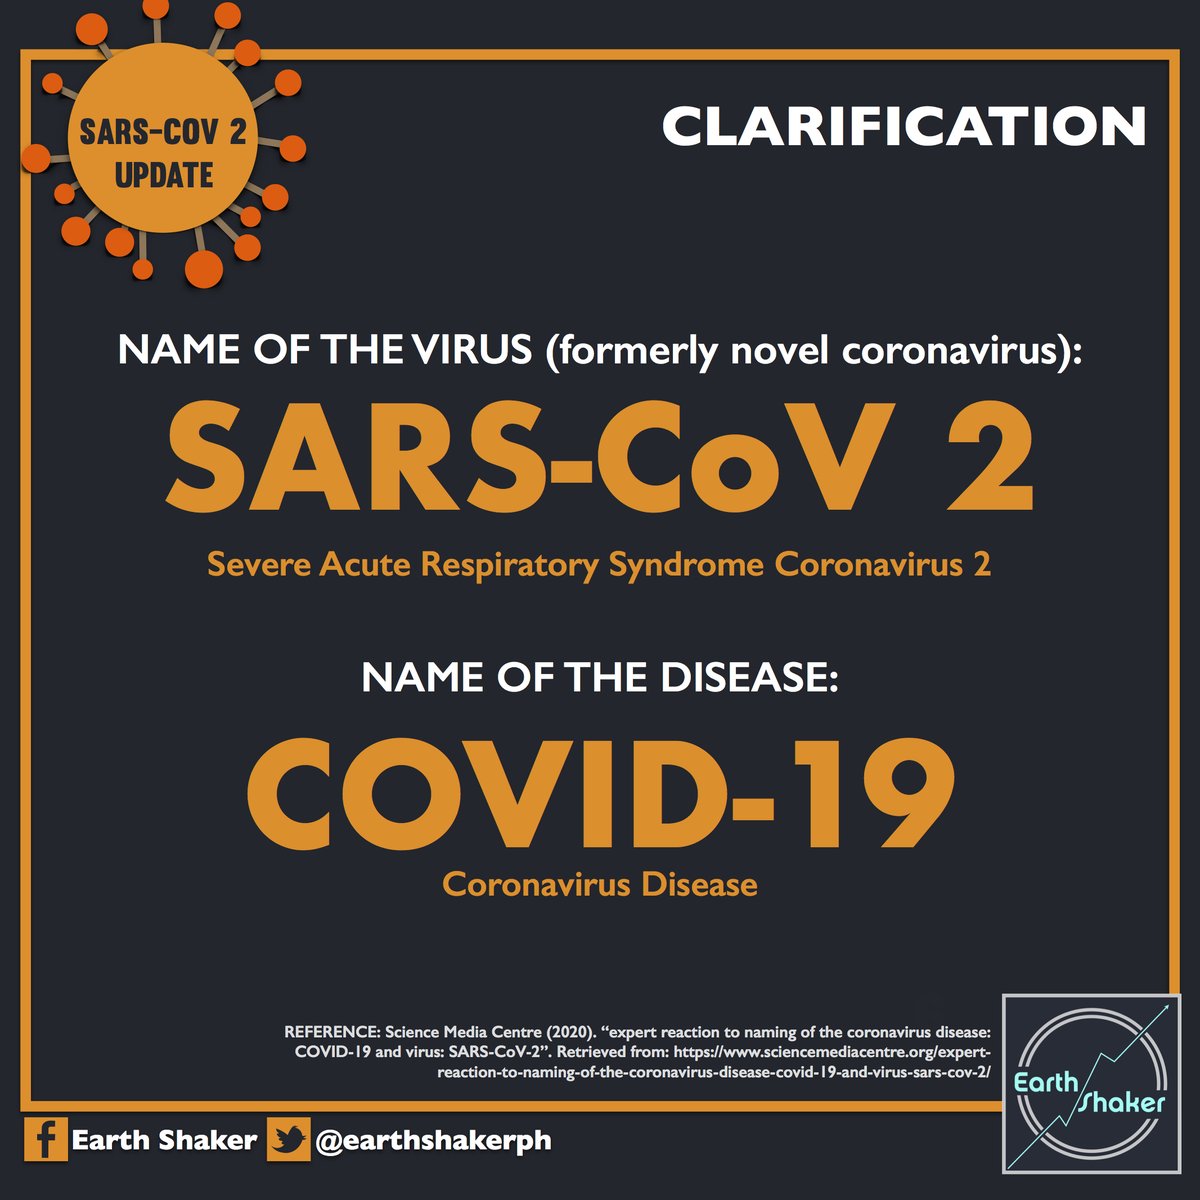 Earth Shaker Ph Clarification On Terminologies The Official Name Of The Novel Coronavirus Is Sars Cov 2 And Not Covid 19 Sars Cov 2 Is The Virus Named By Ictv While The Covid 19